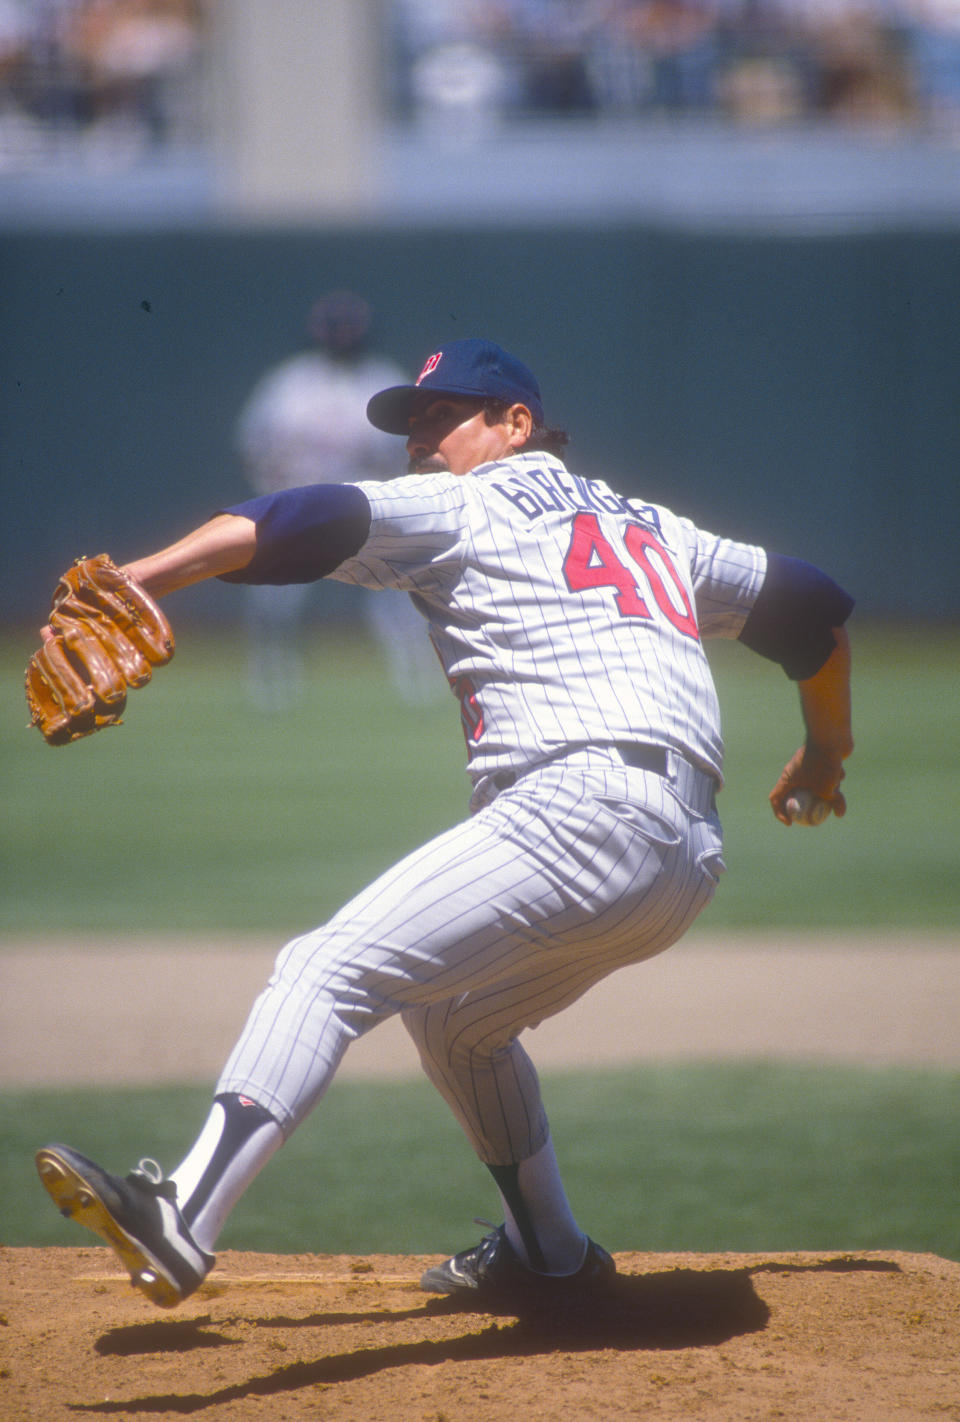 UNSPECIFIED - CIRCA 1990:  Juan Berenguer #40 of the Minnesota Twins pitches during an Major League Baseball game circa 1990. Berenguer played for the Twins from 1987-90. (Photo by Focus on Sport/Getty Images)